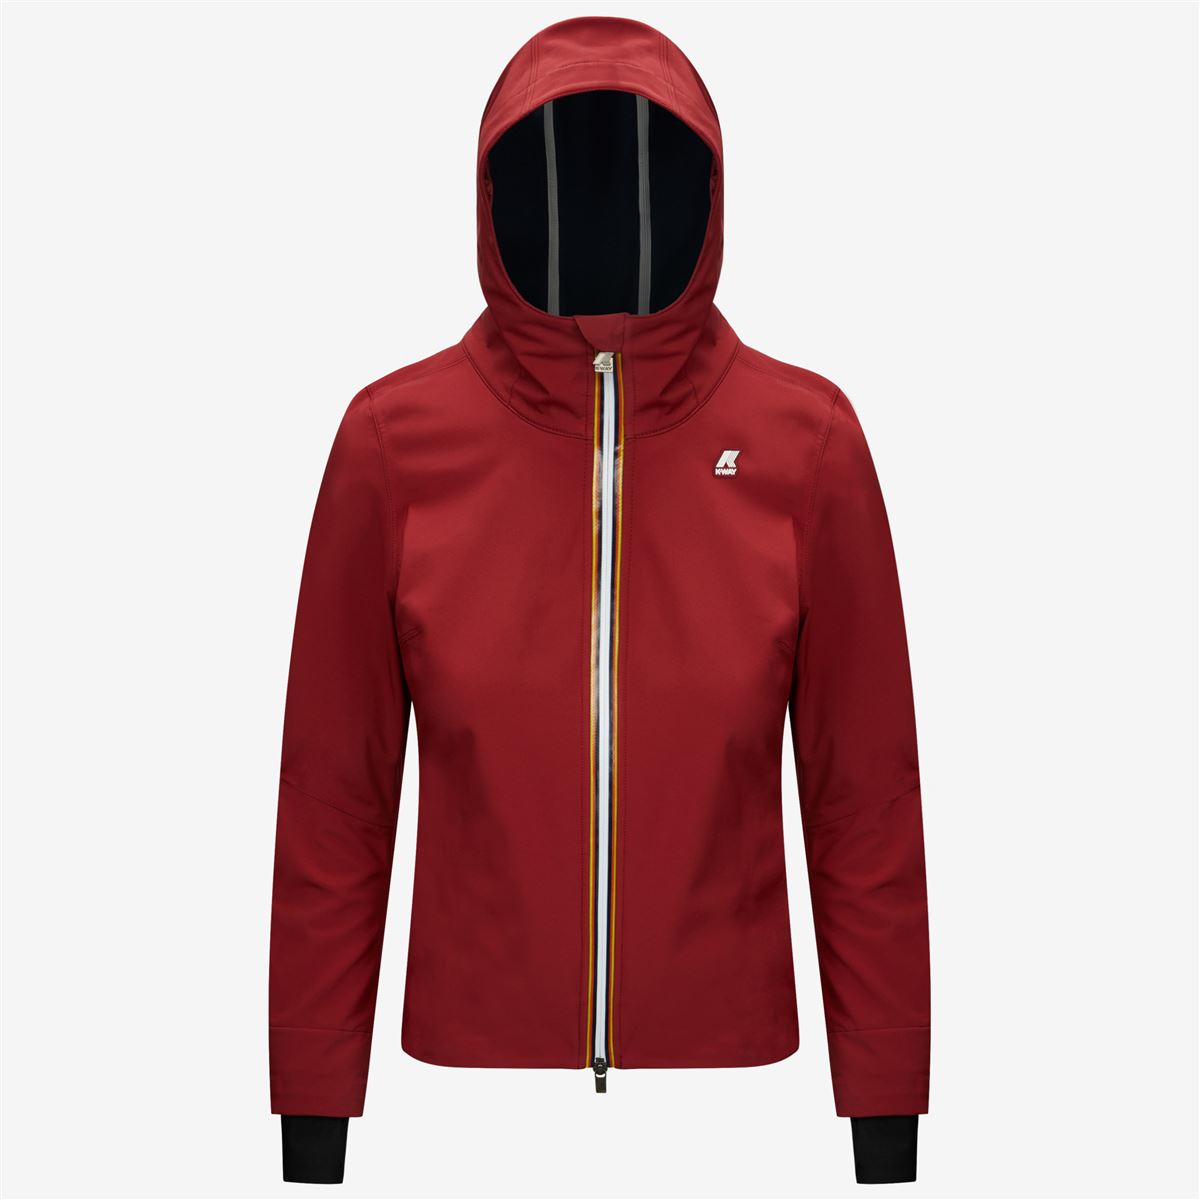 Lil Bonded - Polyester - Jackets - Short - Woman - Red Dk - Blue Depth